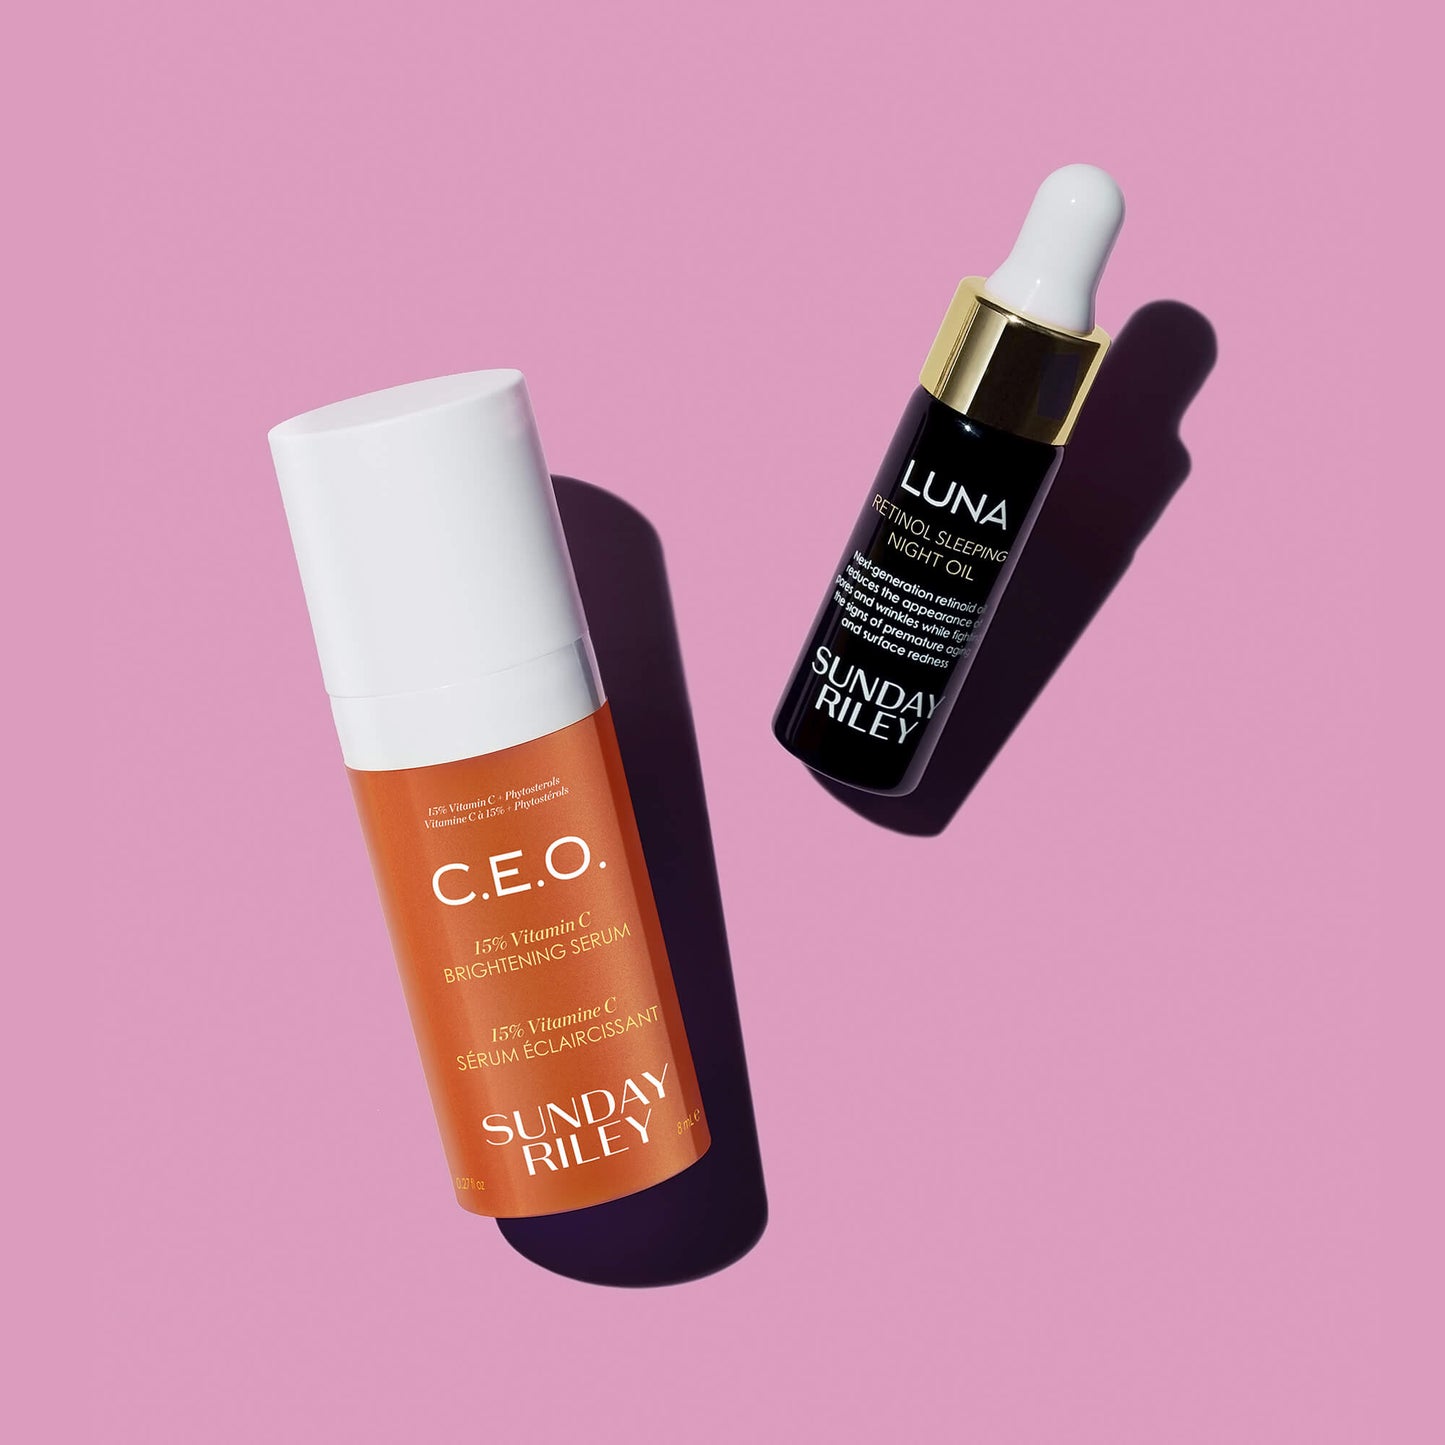 C.E.O. Serum and Luna bottles on a dark pink background with shadow